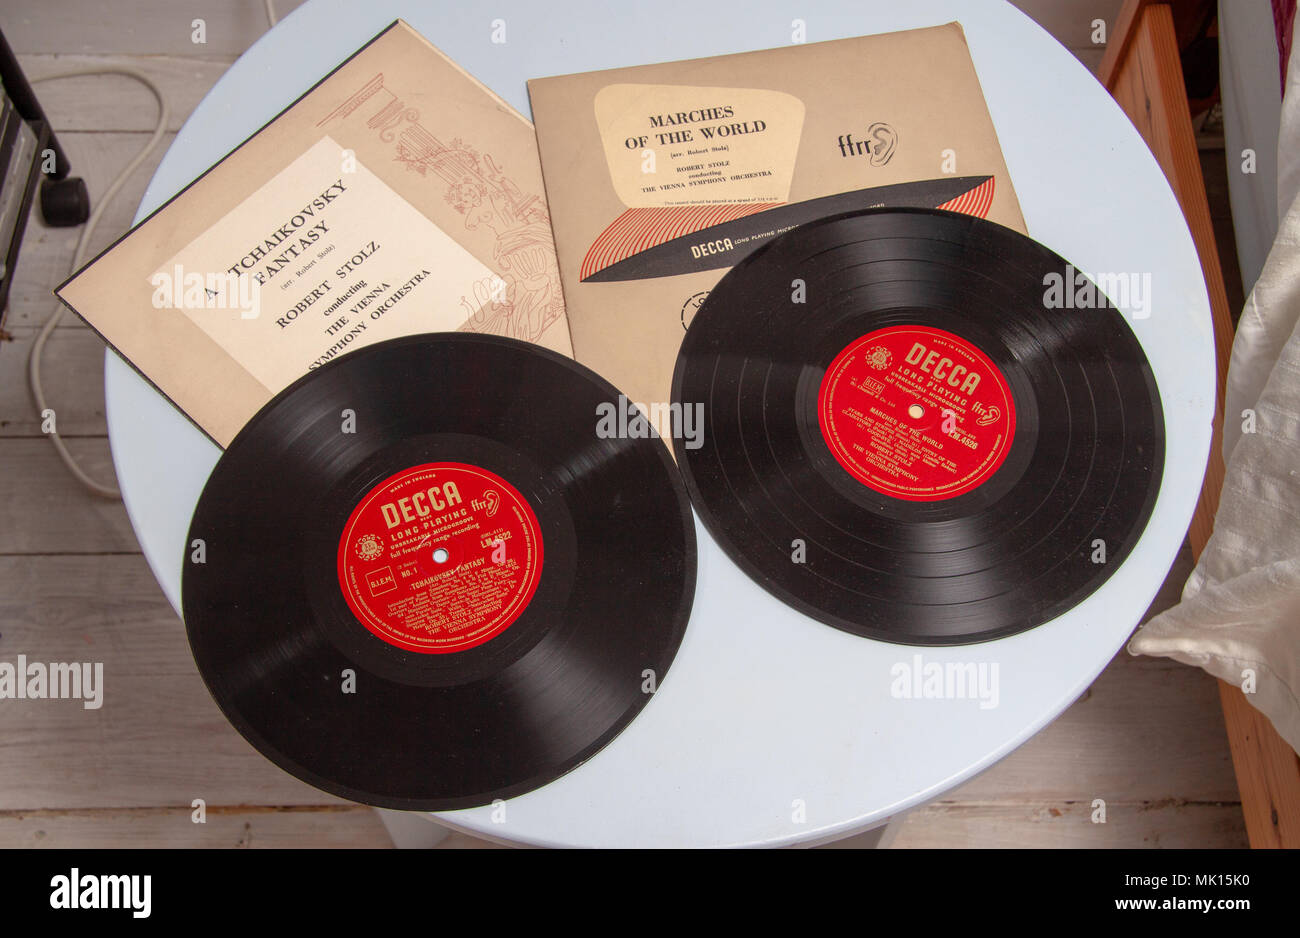 Detail Images Of Record Albums Nomer 44